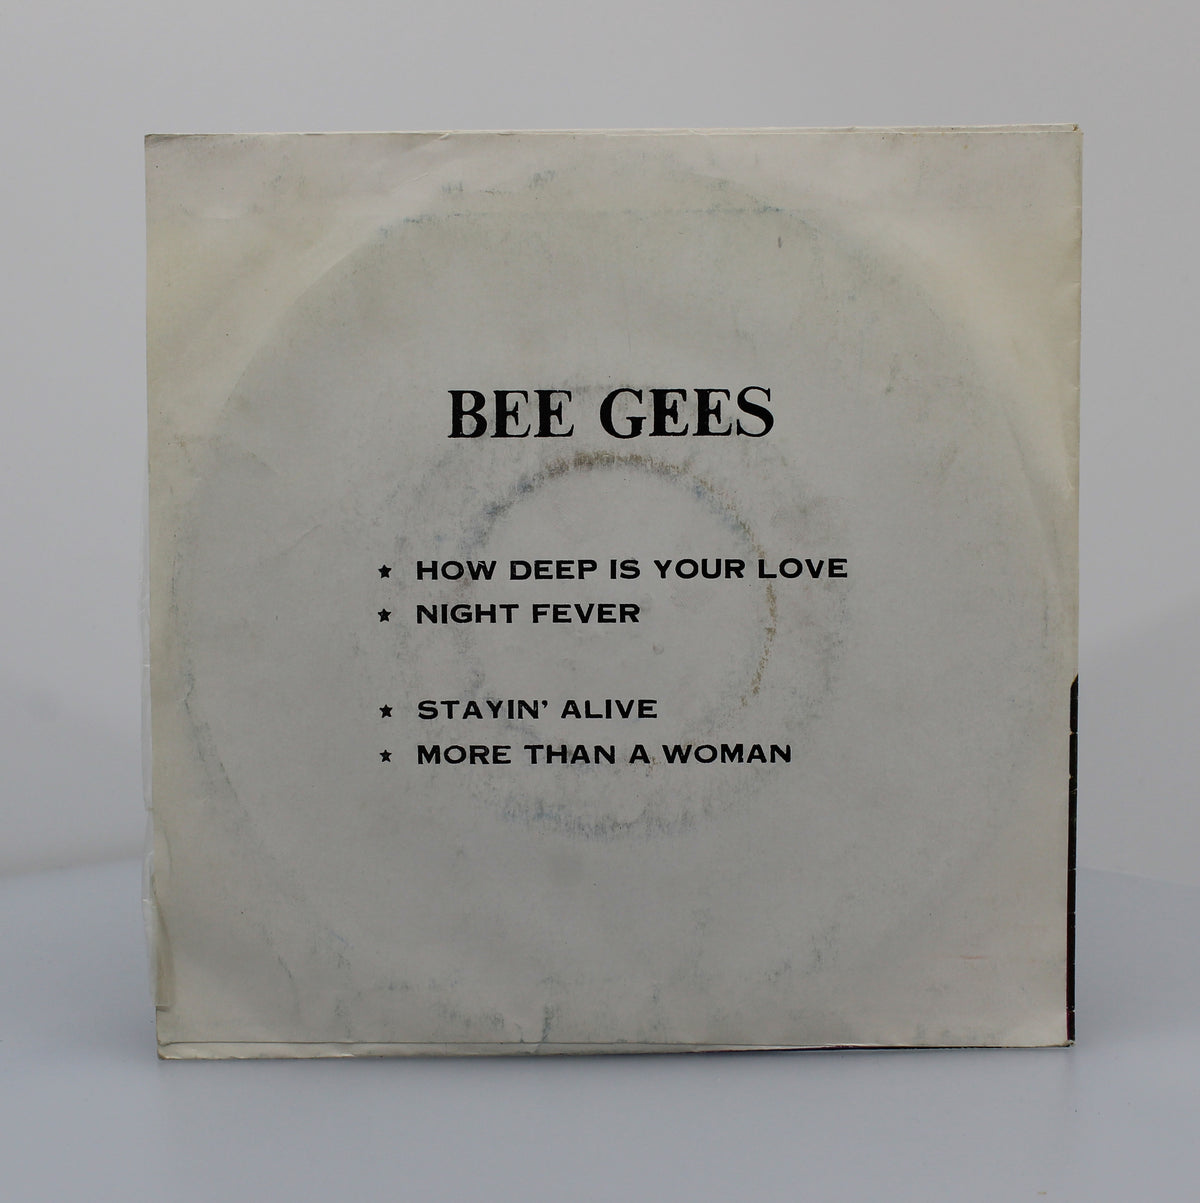 Bee Gees - How Deep Is Your Love, Vinyl Single EP 45 rpm, Thailand 1978